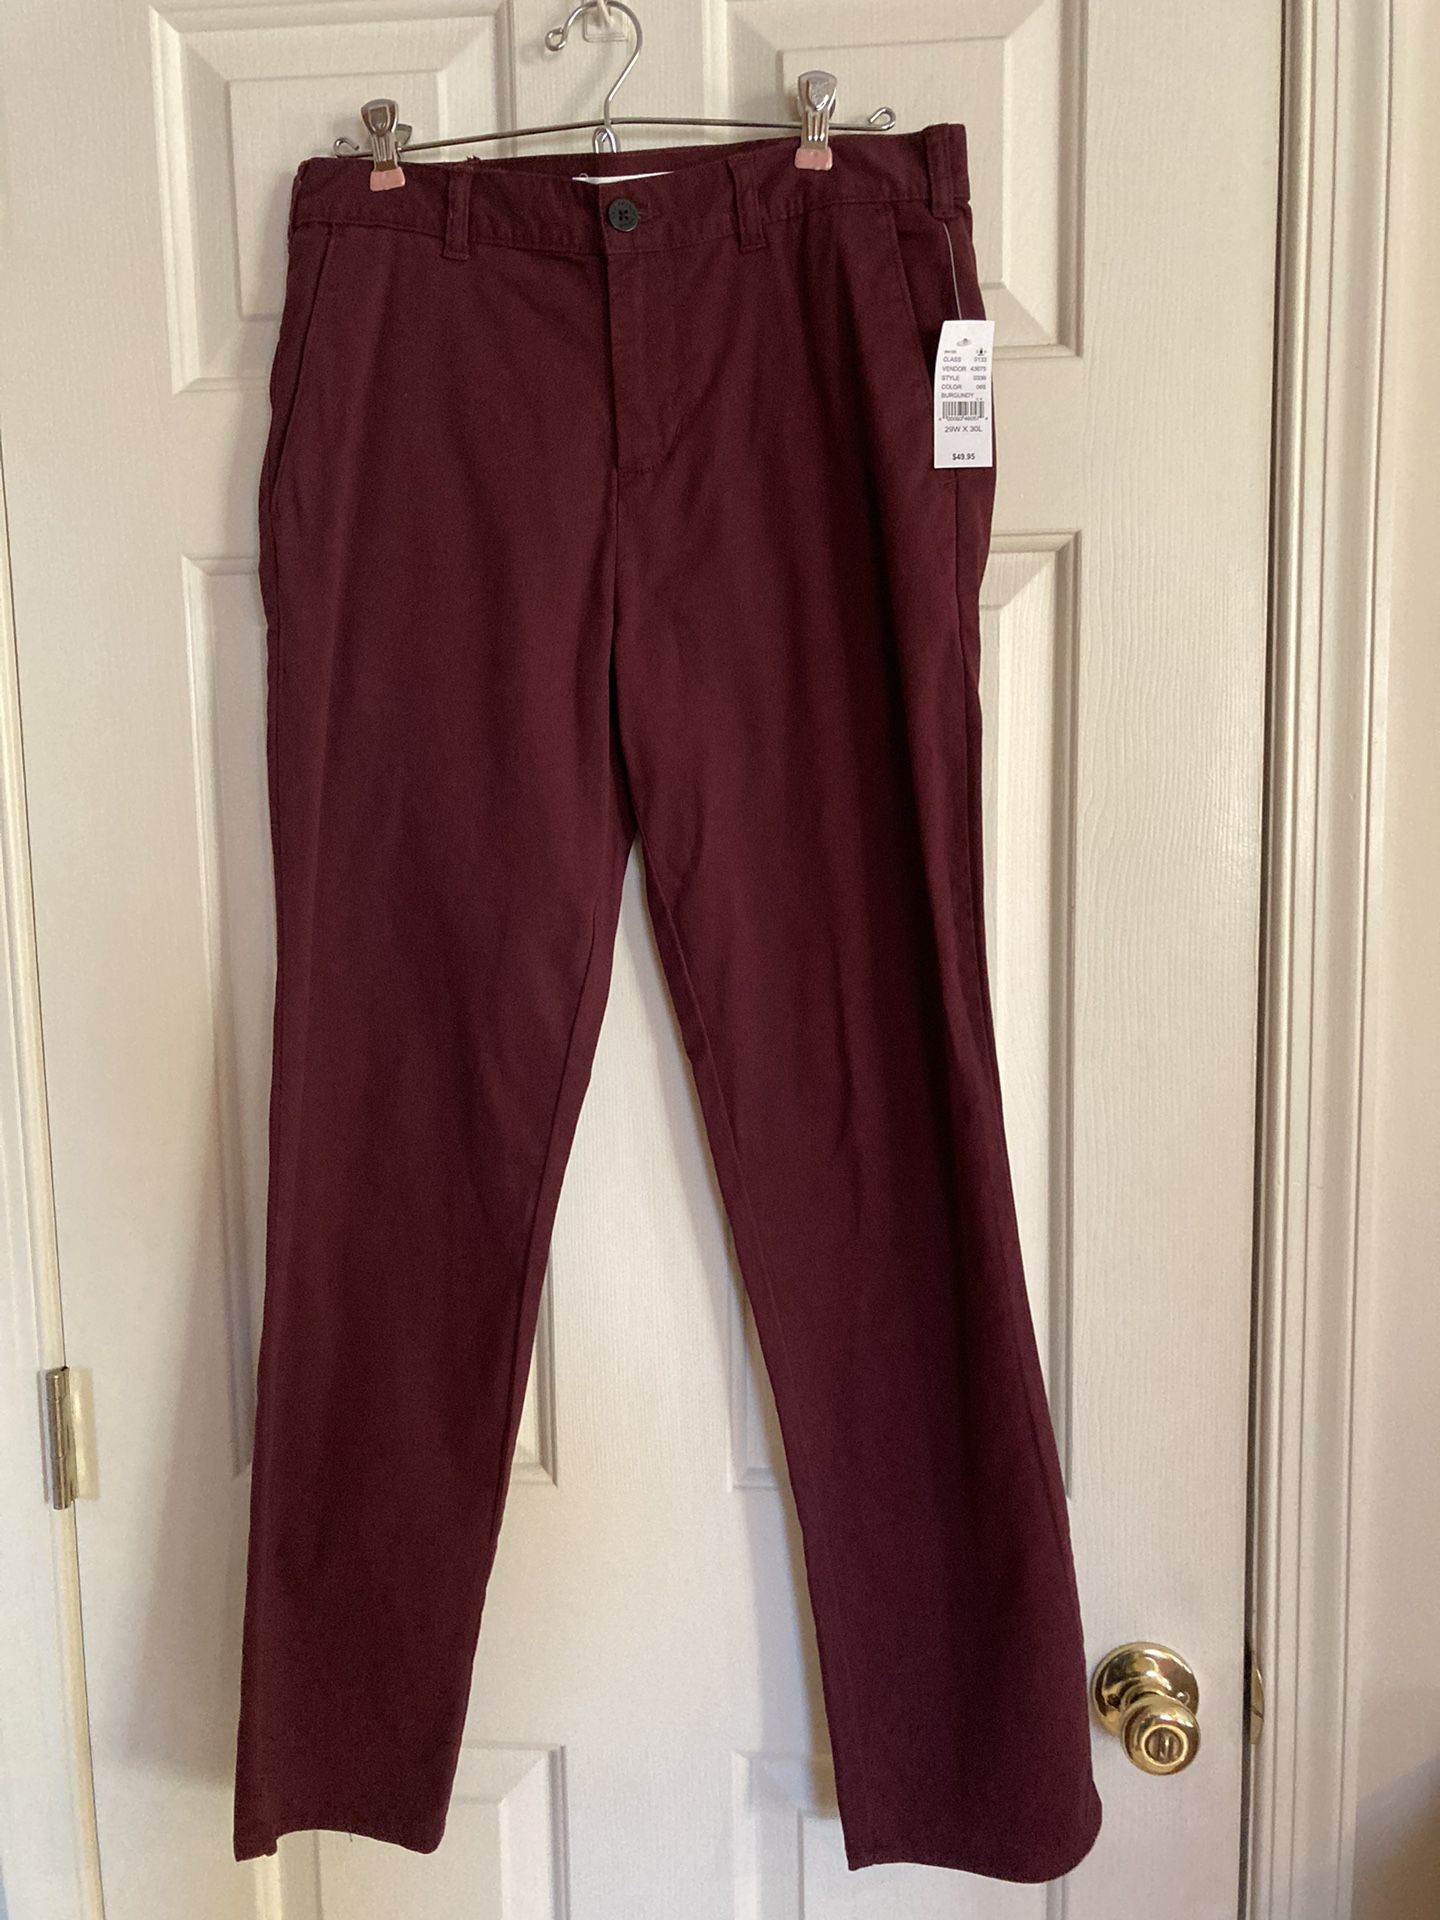 Pac.Sun Men’s Pants Size 29 X 30 Slim Casual Maroon Color Brand New